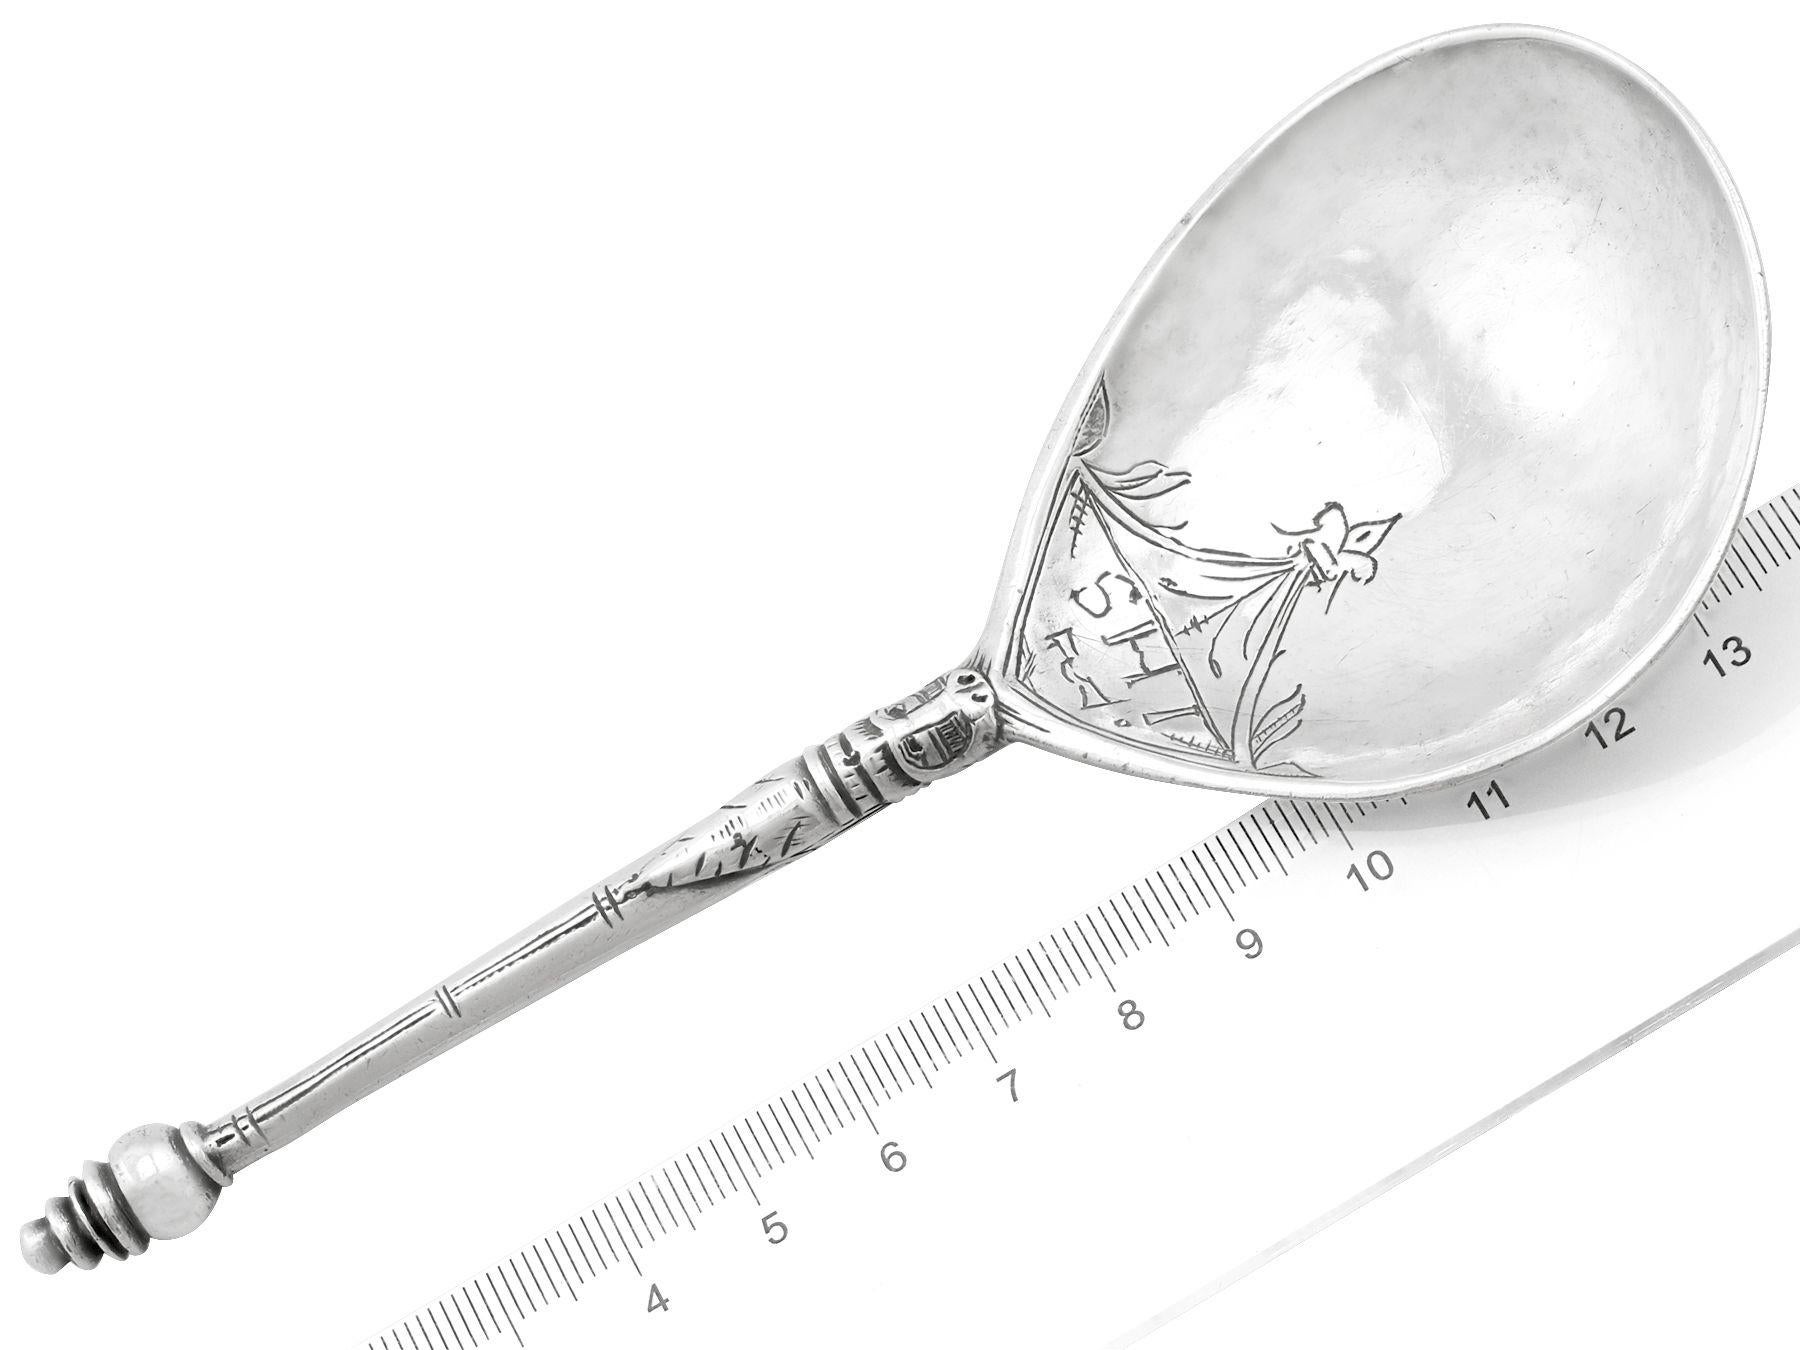 Antique Norwegian Silver Spoon, Circa 1650 In Excellent Condition For Sale In Jesmond, Newcastle Upon Tyne